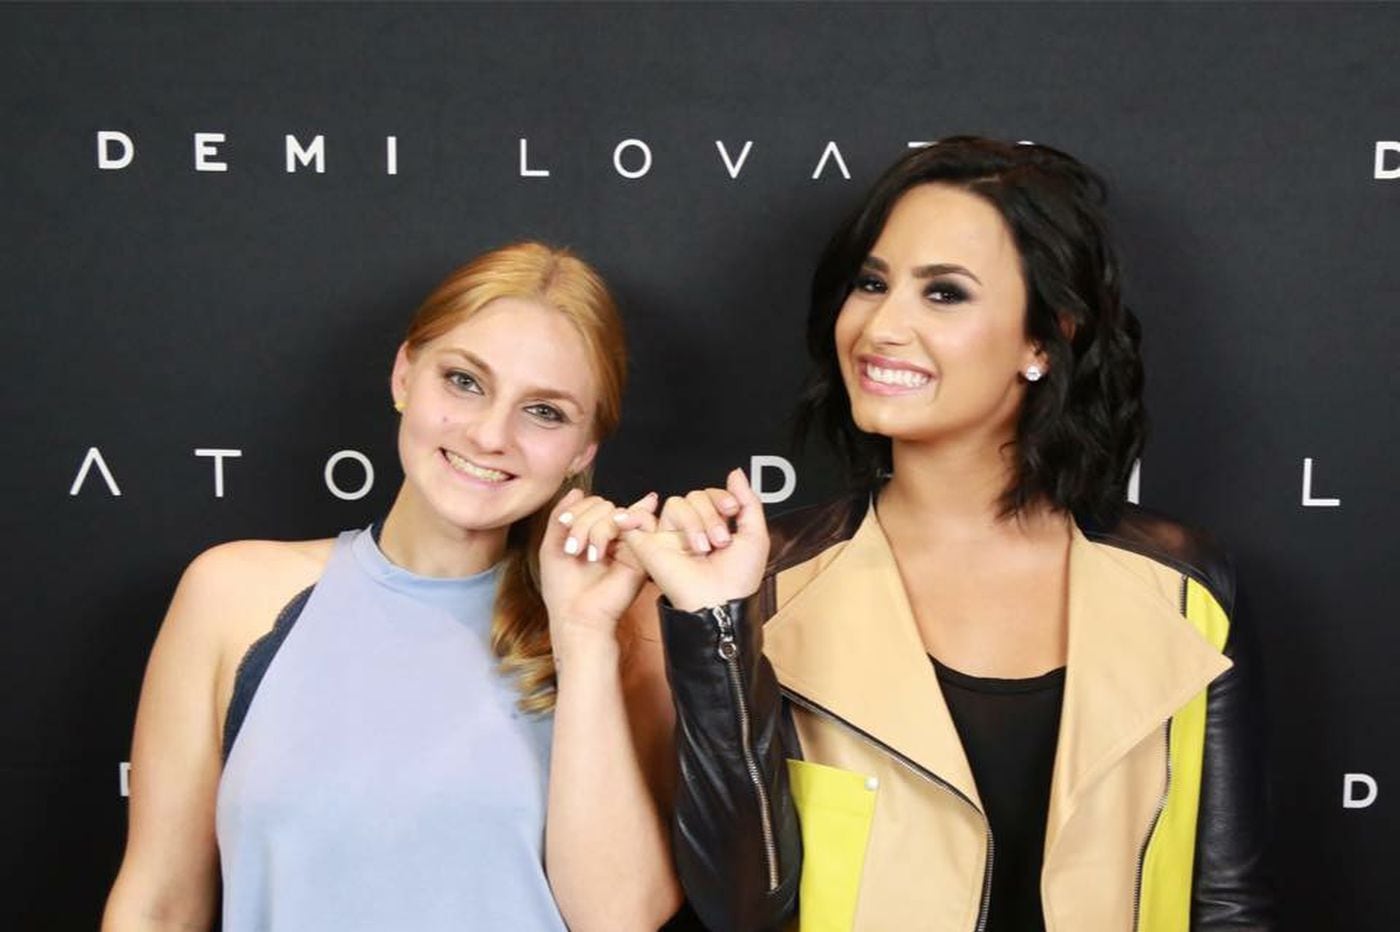 Philly fans rally to support Demi Lovato as a recovery warrior and inspiration after ...